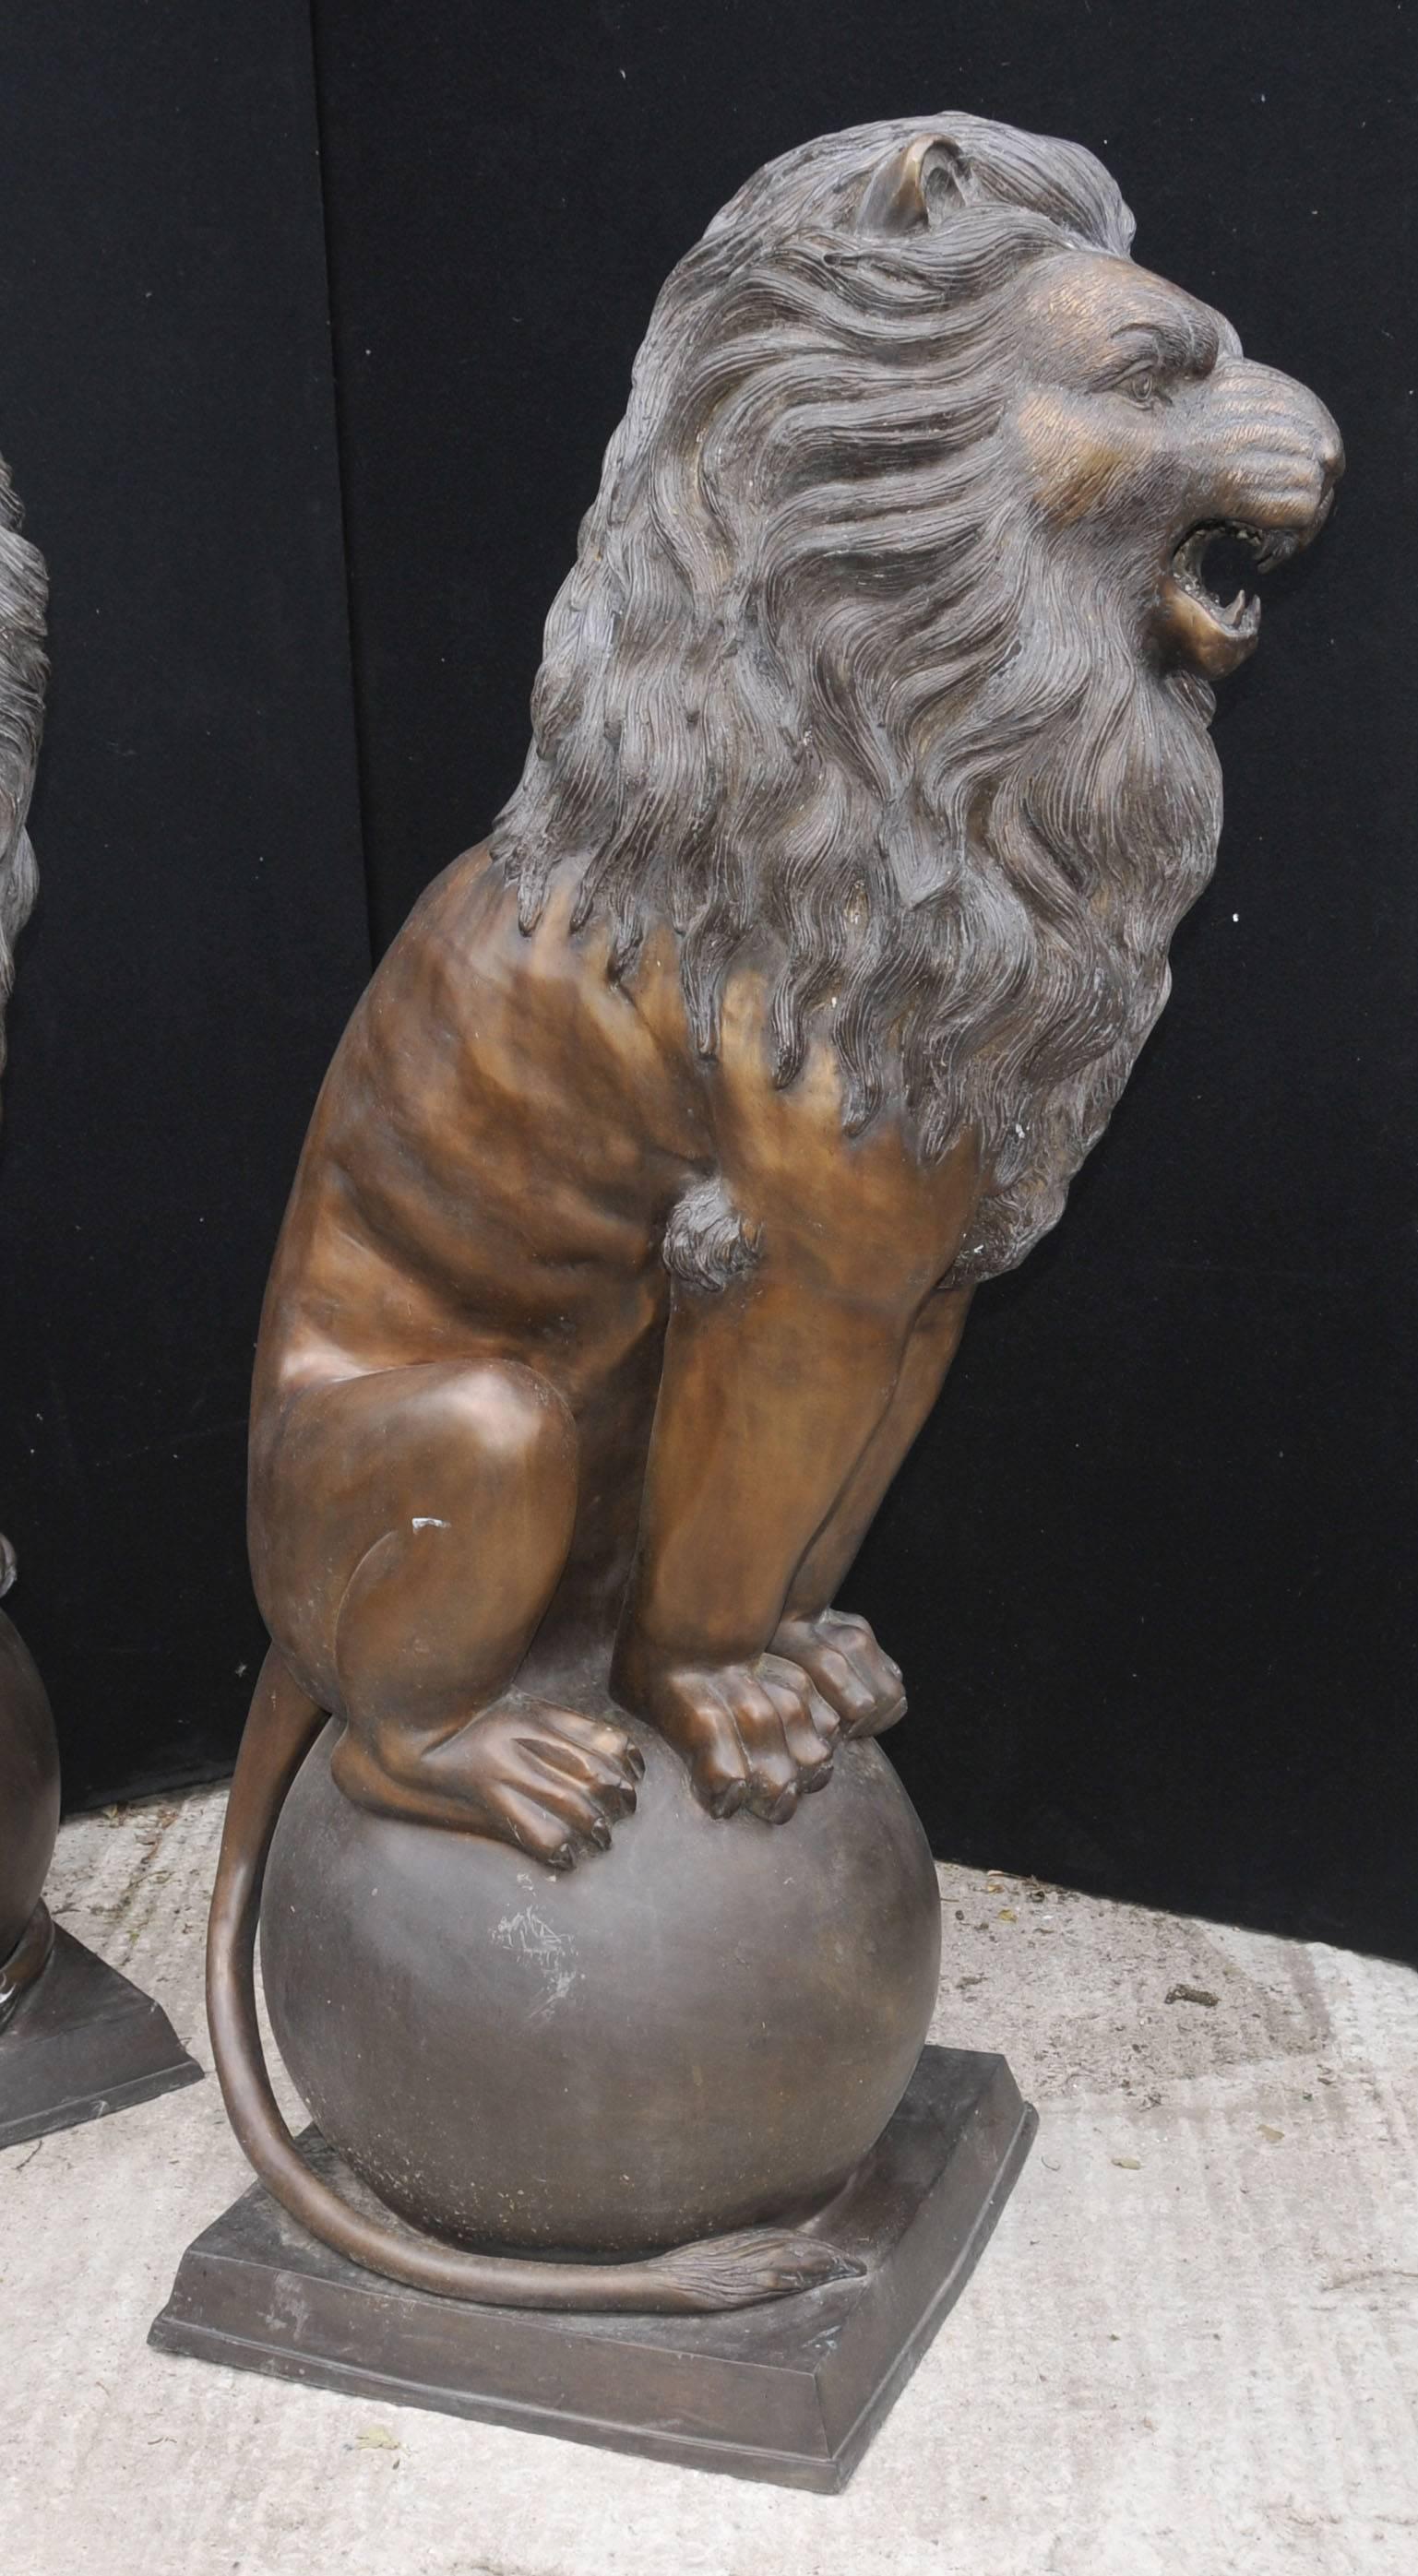 Gorgeous pair of large bronze lions on balls.
Classic pair of gatekeepers, these would look great guarding your door or property.
Stand in at five feet tall - 157 cm - so good size to these.
Lovely brown patina to this pair.
Of course being